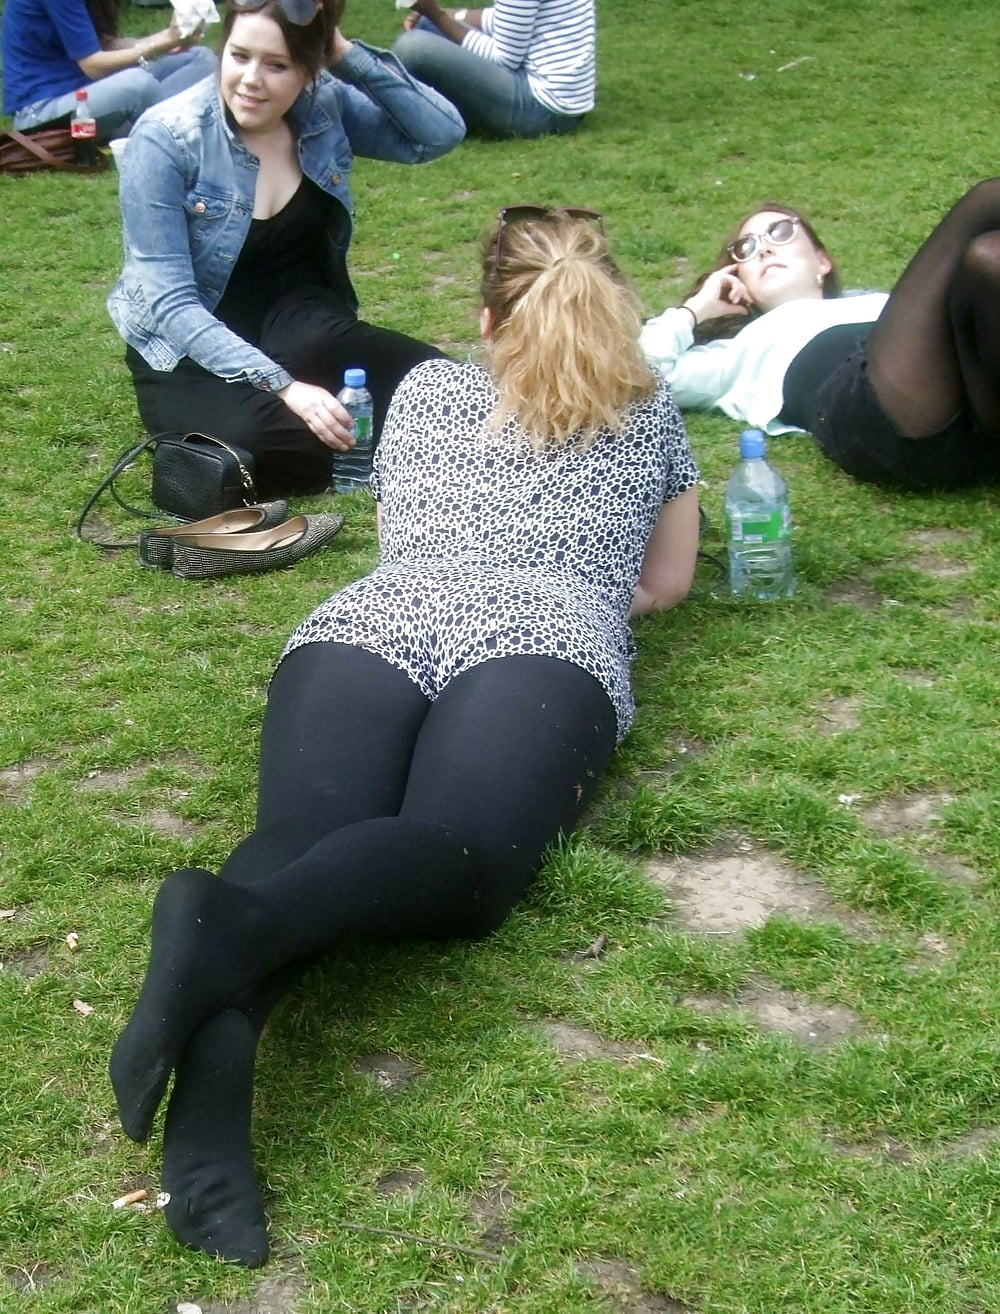 Sneakers and pantyhose candids - Photo #23.